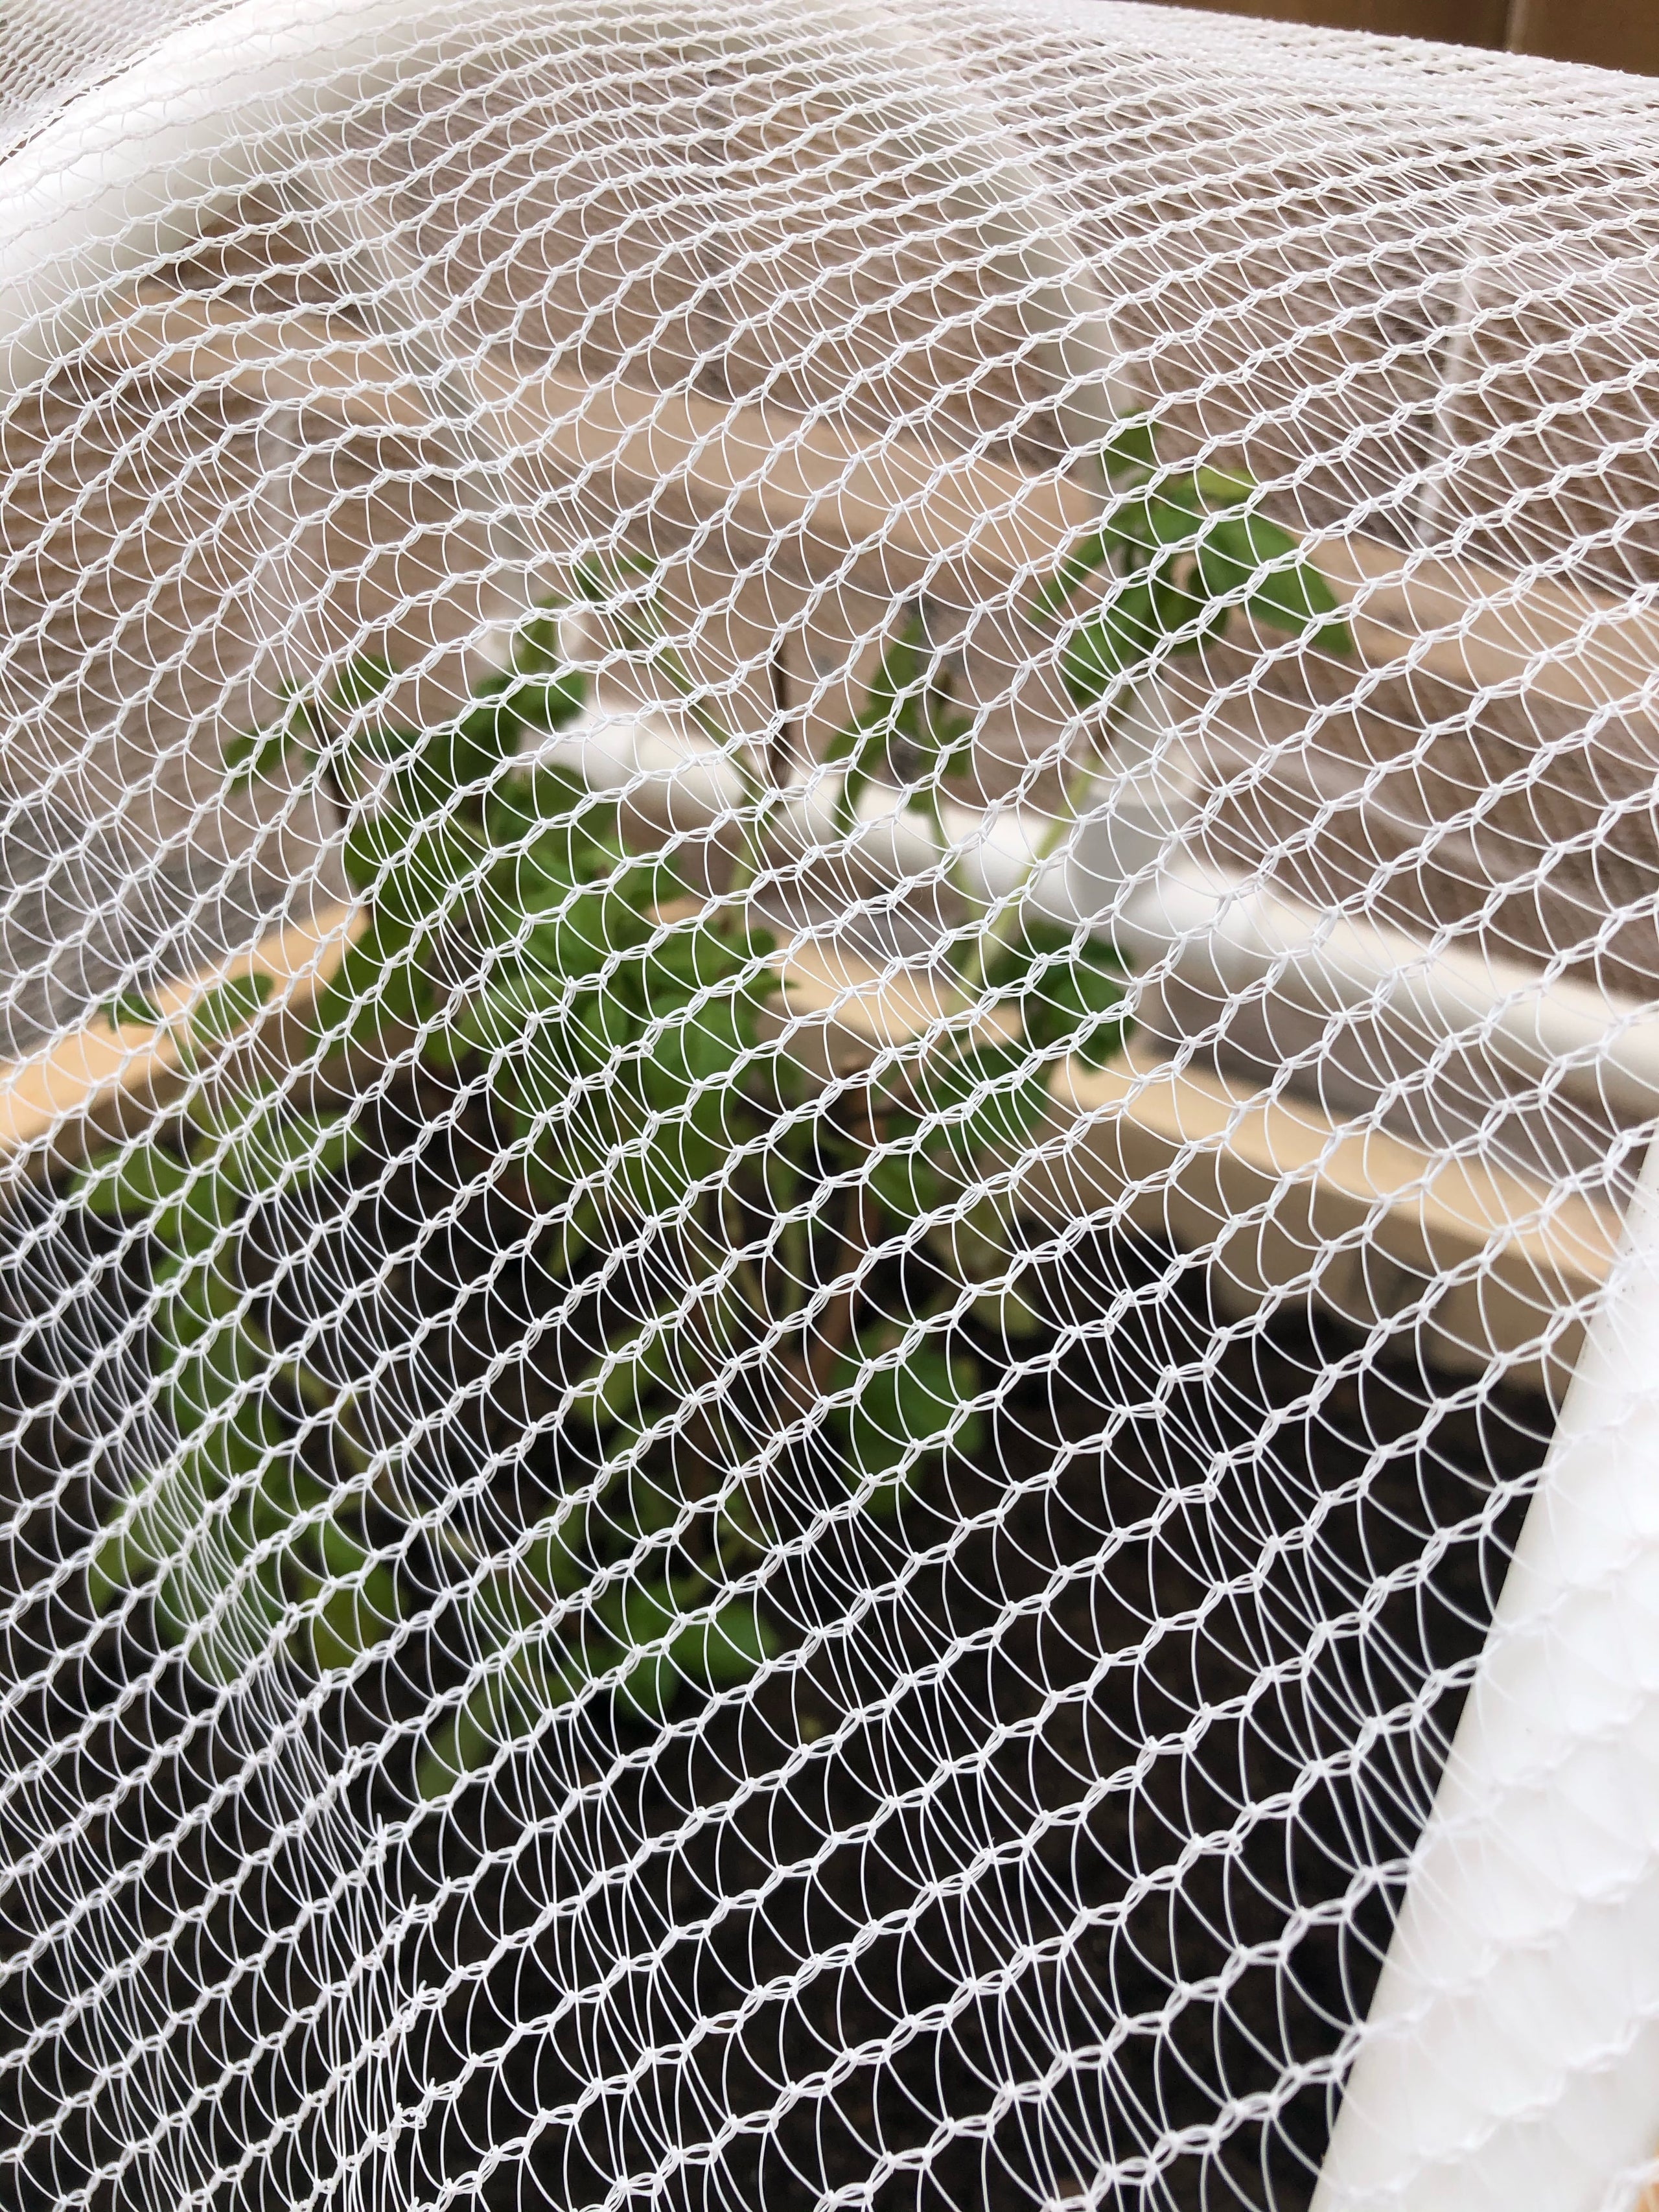 Hail Netting - protect from bird, insects, pests or hail damage.